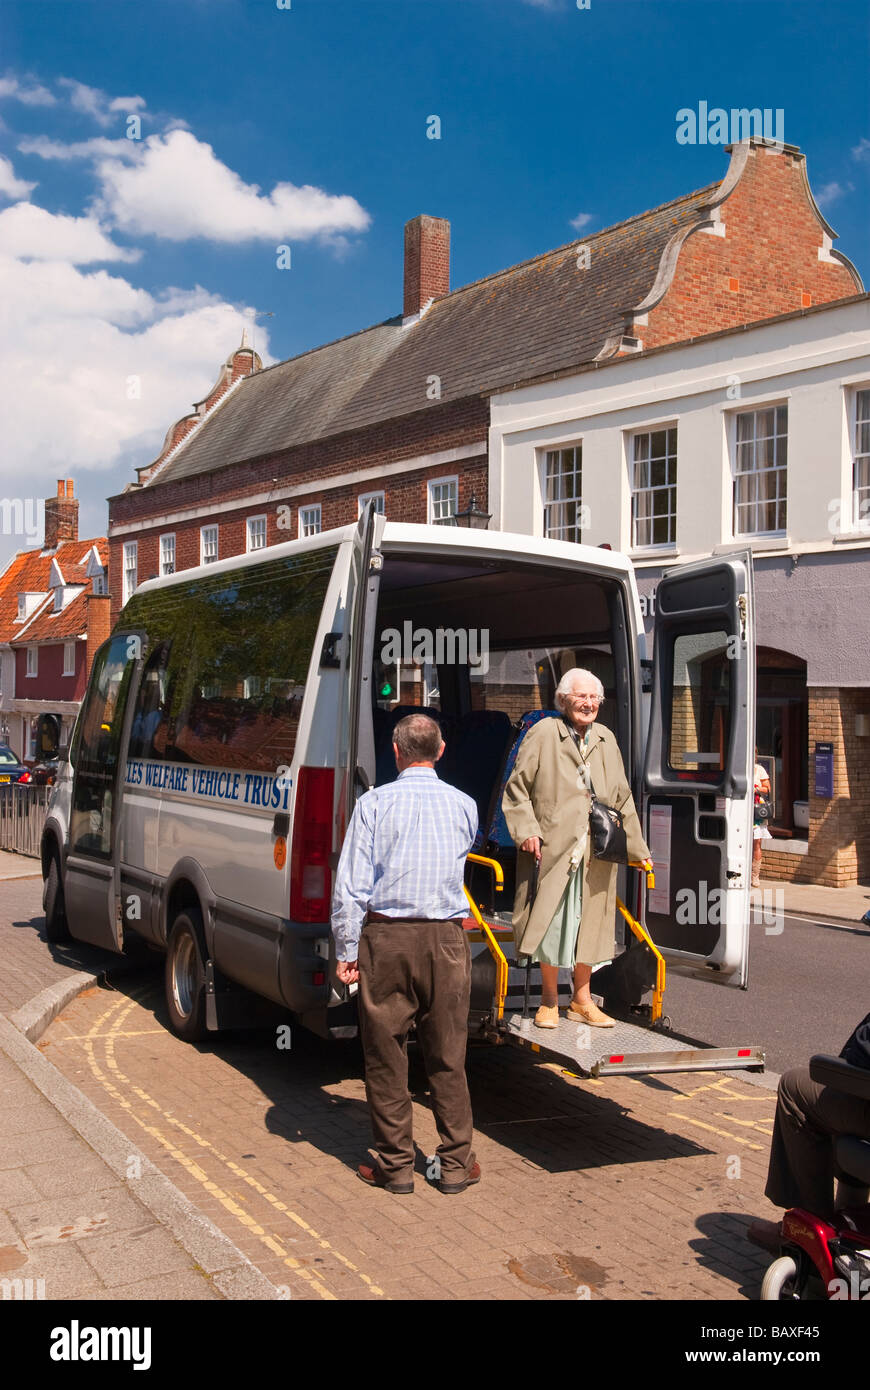 A vehicle for transporting elderly and disabled people complete with a tail lift at the back for easy access for wheelchairs Stock Photo